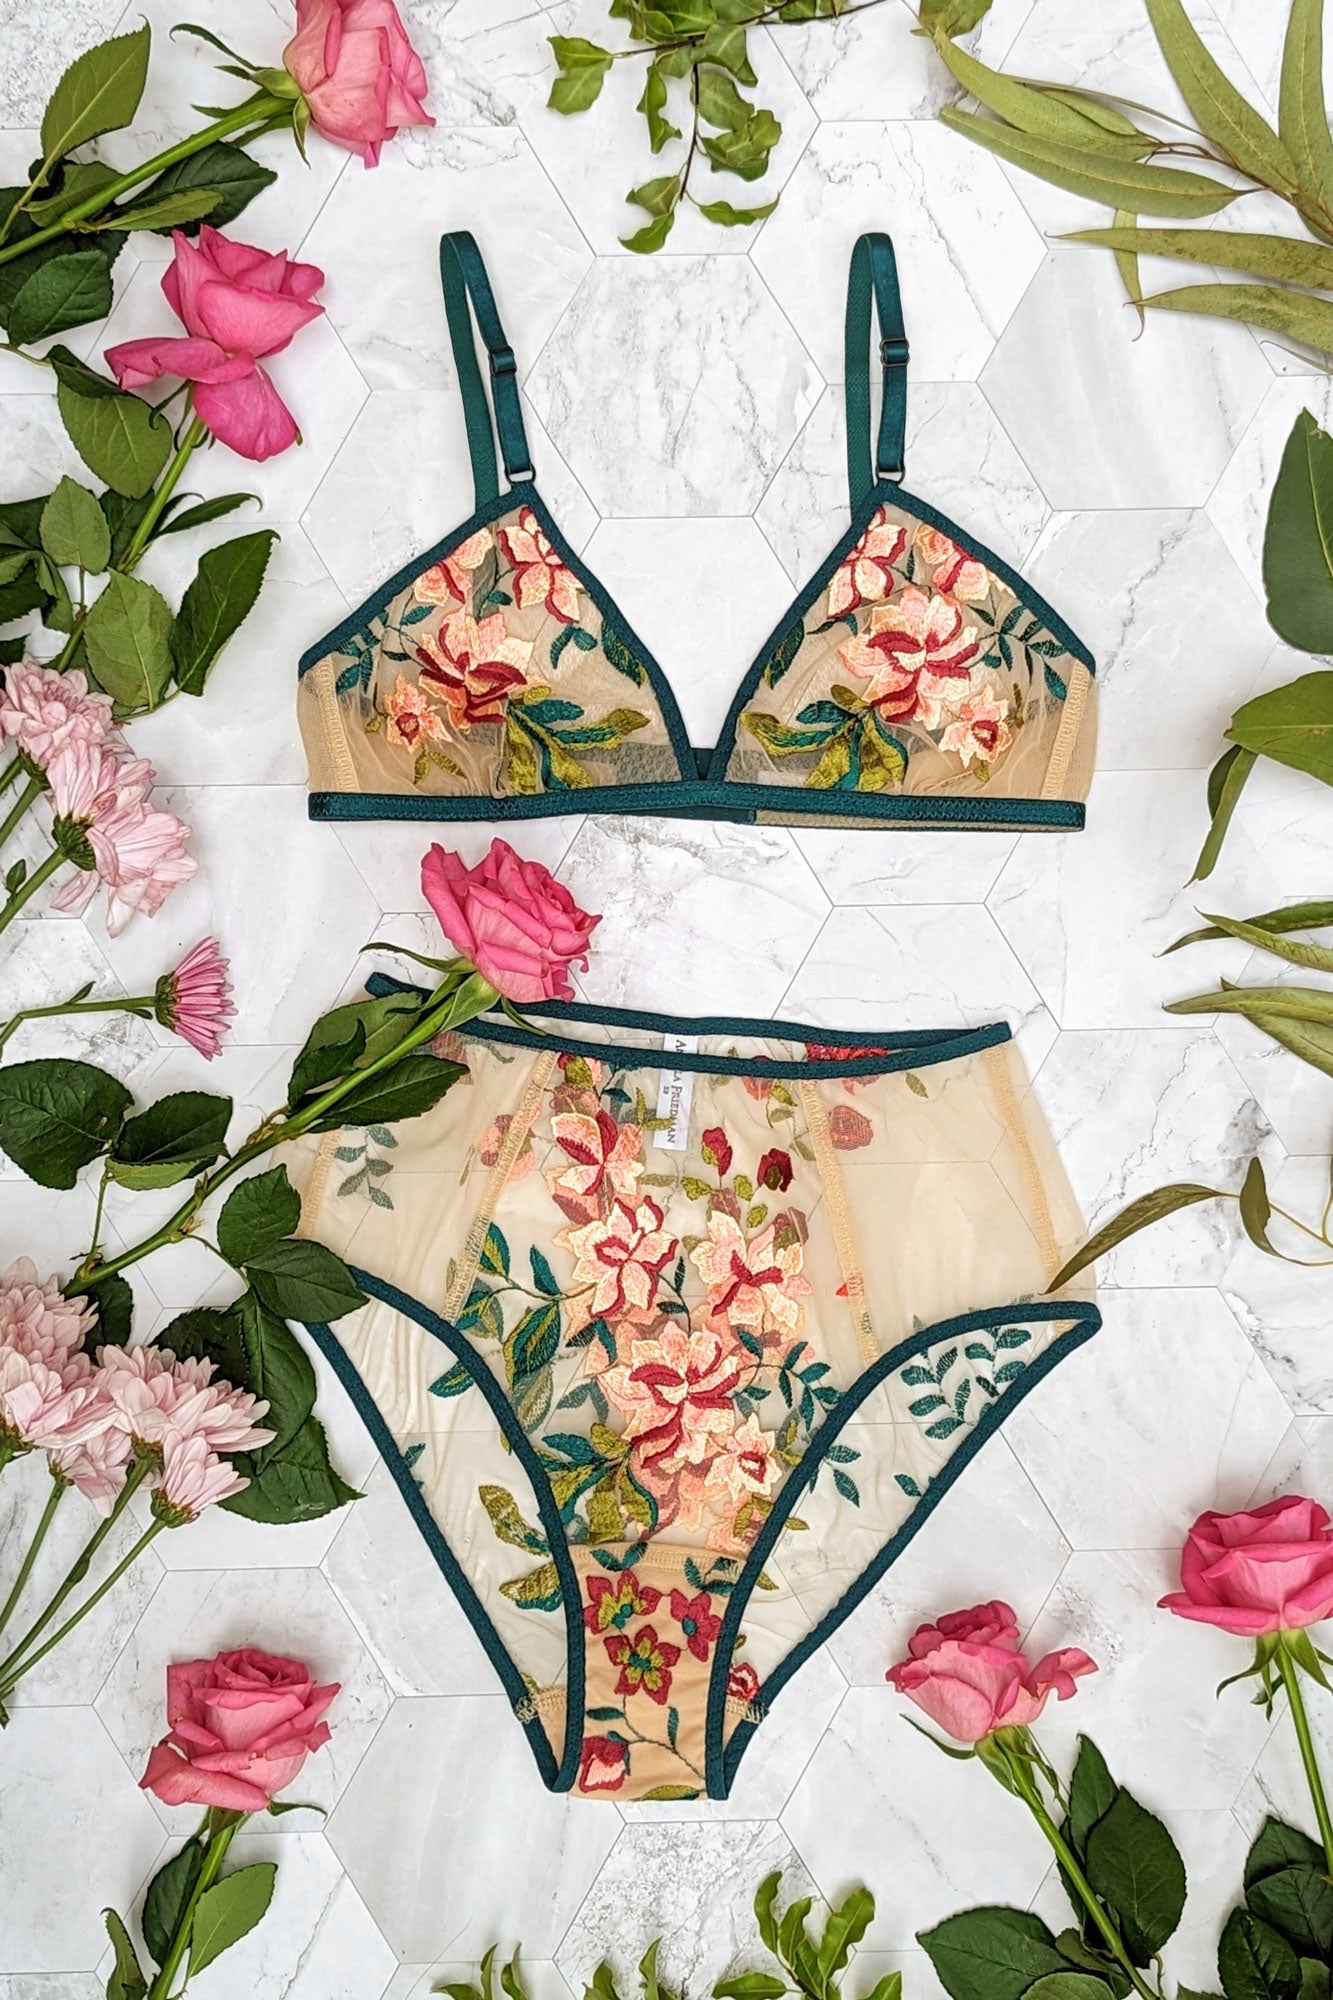 Luxury floral lingerie set with an embroidered bra and sheer panel knickers